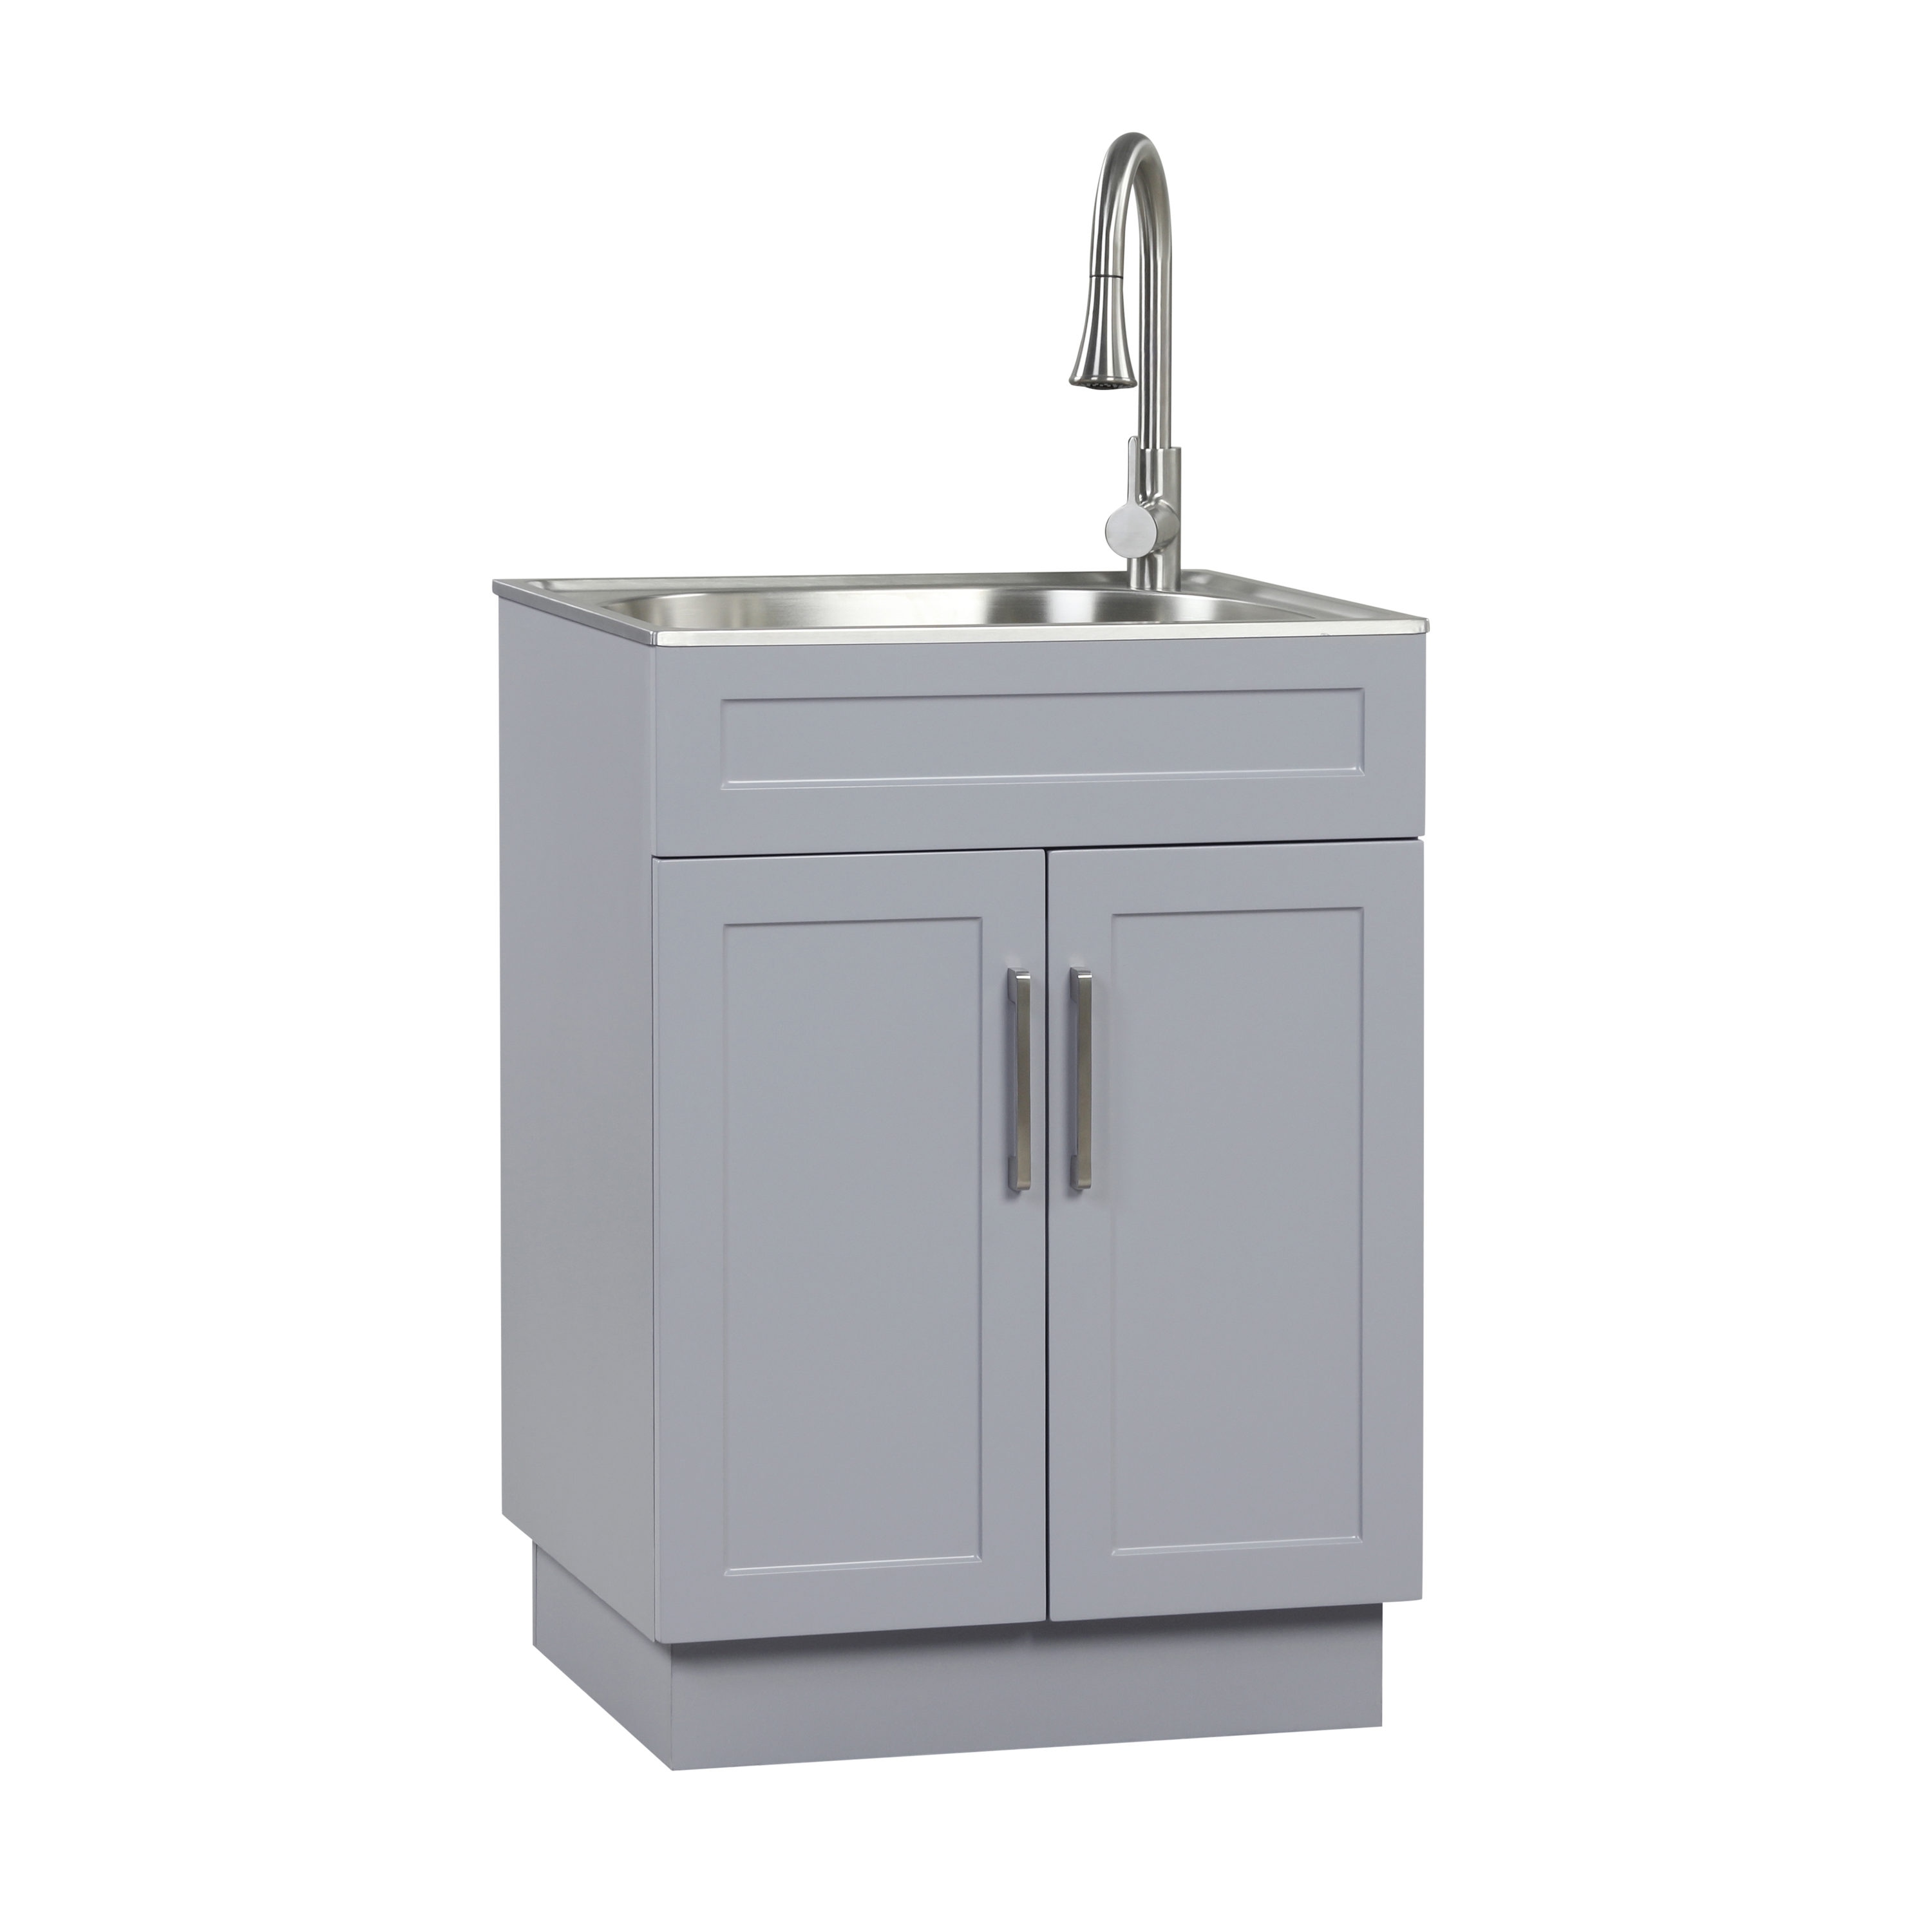 Style Selections 22-in x 24.4-in 1-Basin White Freestanding Laundry Sink  with Faucet at